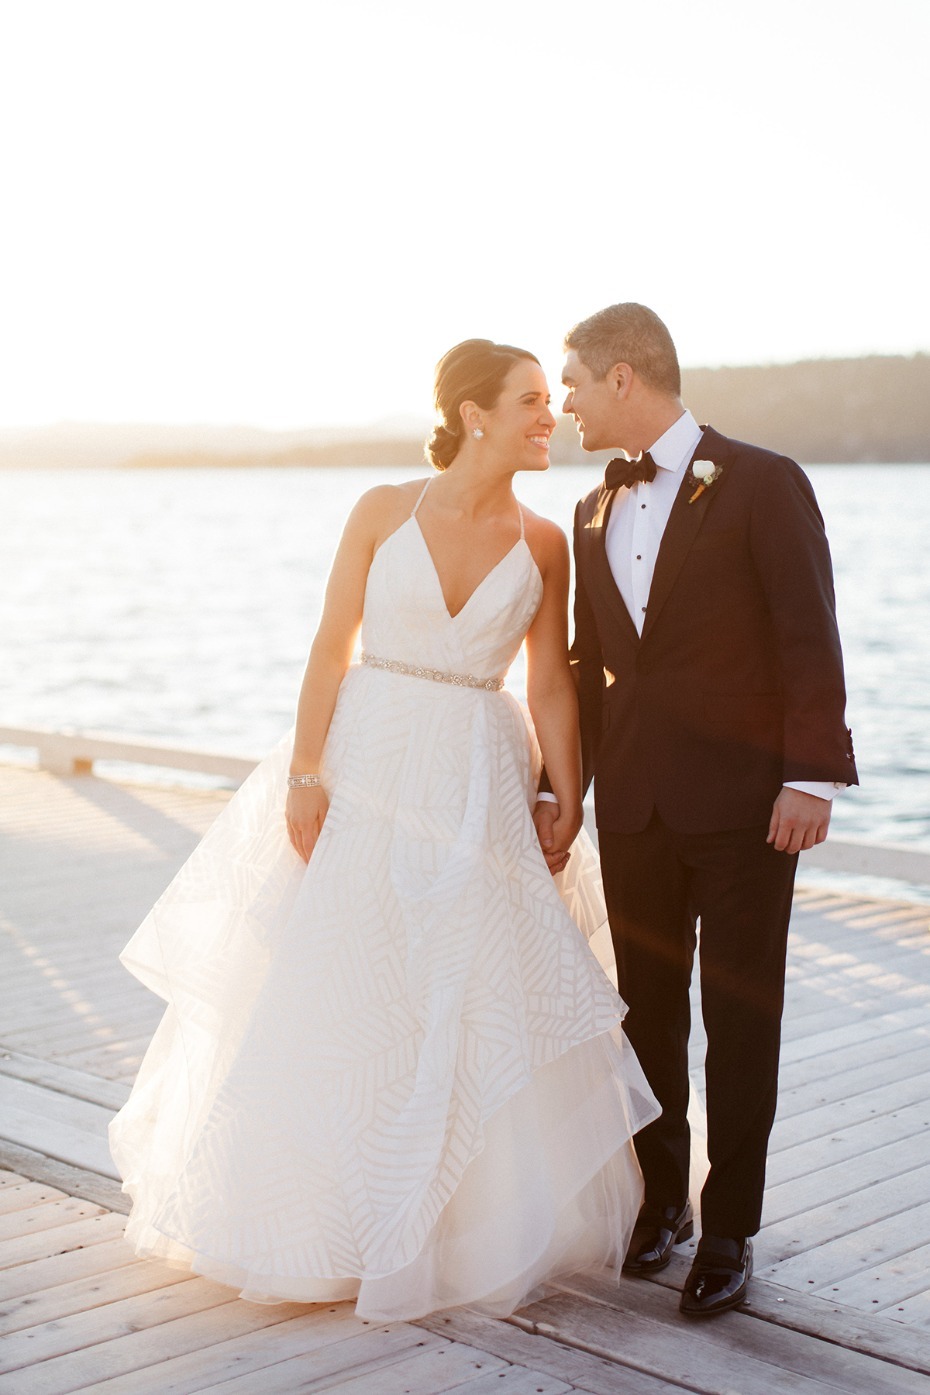 10 Real Brides in Hayley Paige Dresses You Can't Miss